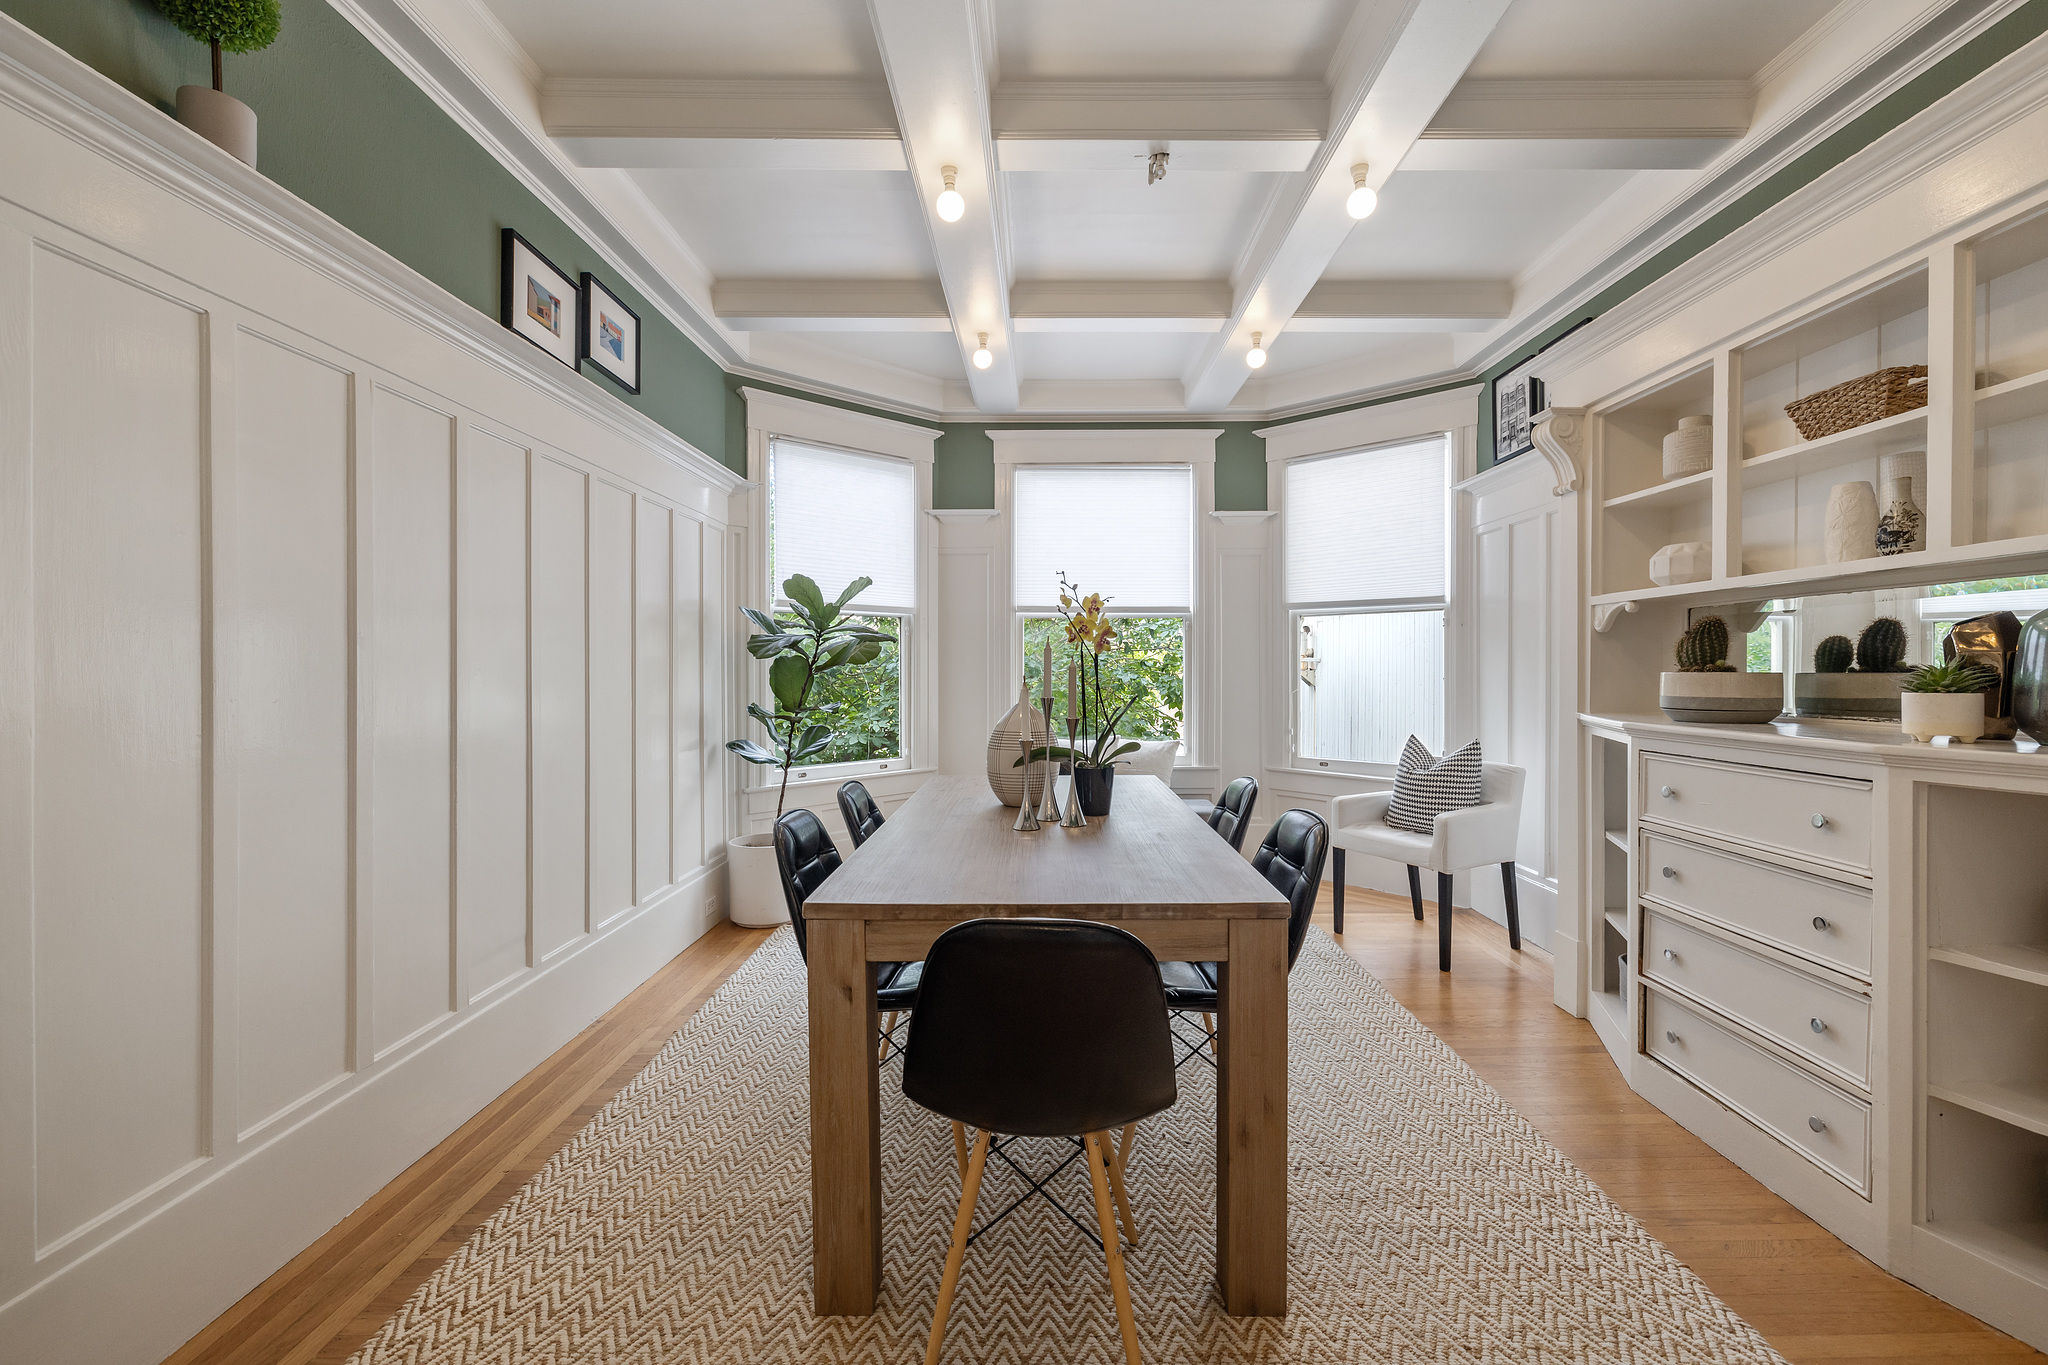 Property Photo: Formal dining room with boxed ceilings and wood floors